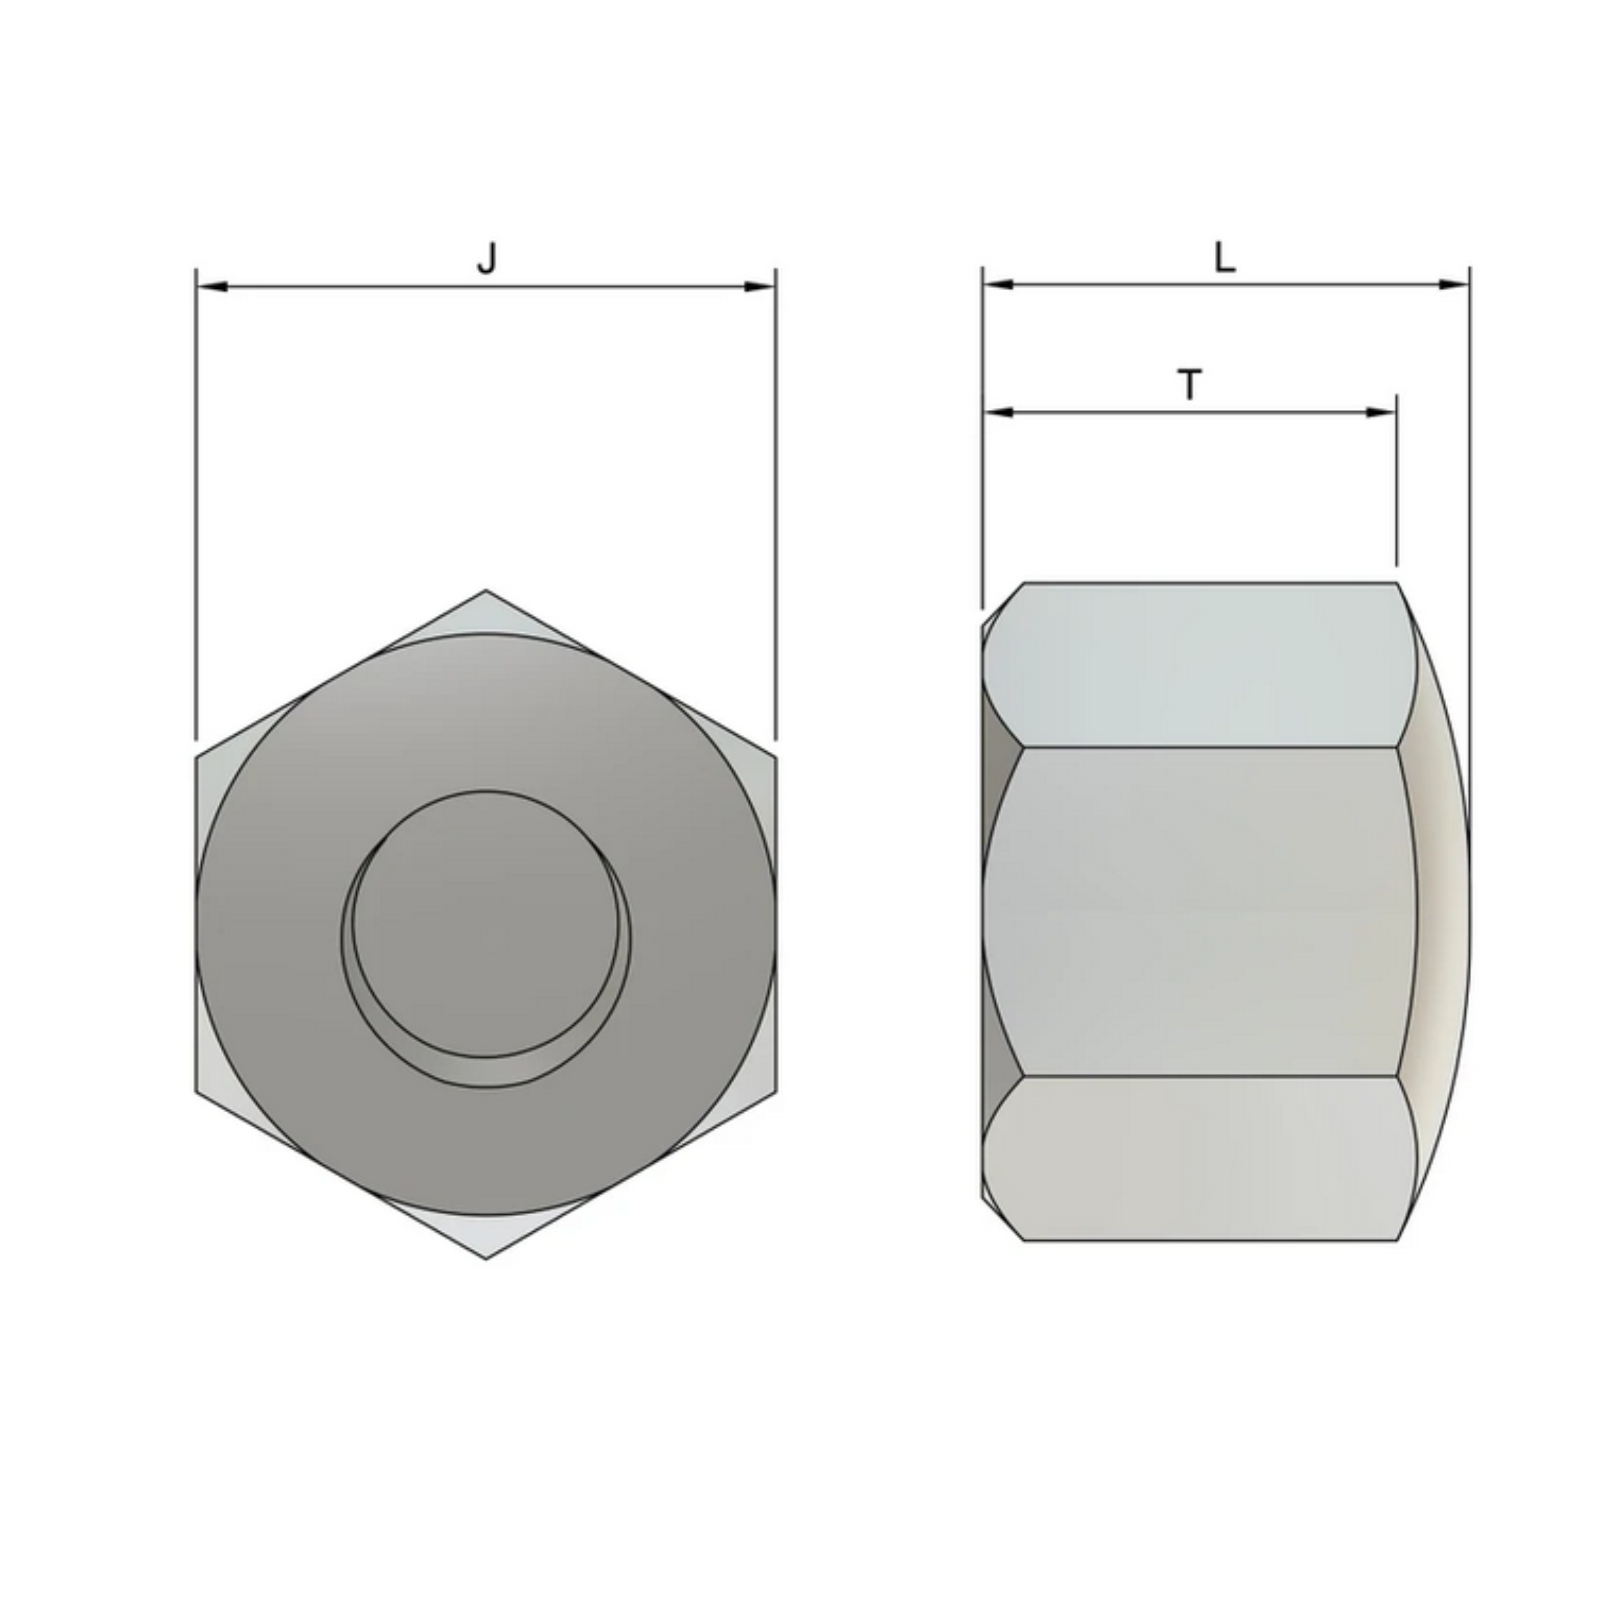 M10 Cap Nuts (DIN 917) - Stainless Steel (A4)